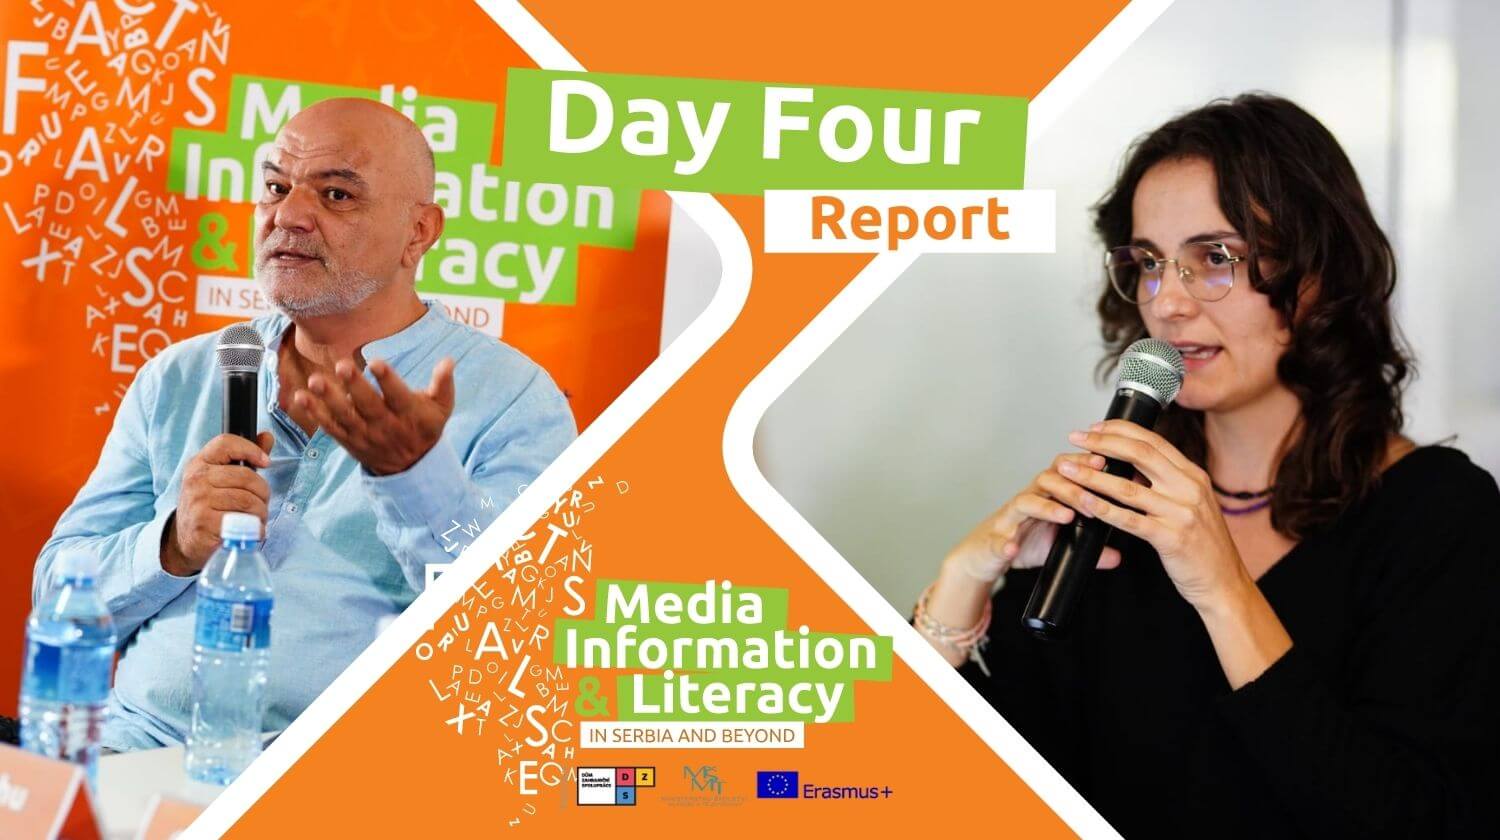 AI and its Implications in Media Literacy: Day Four of the Media Information and Literacy Programme